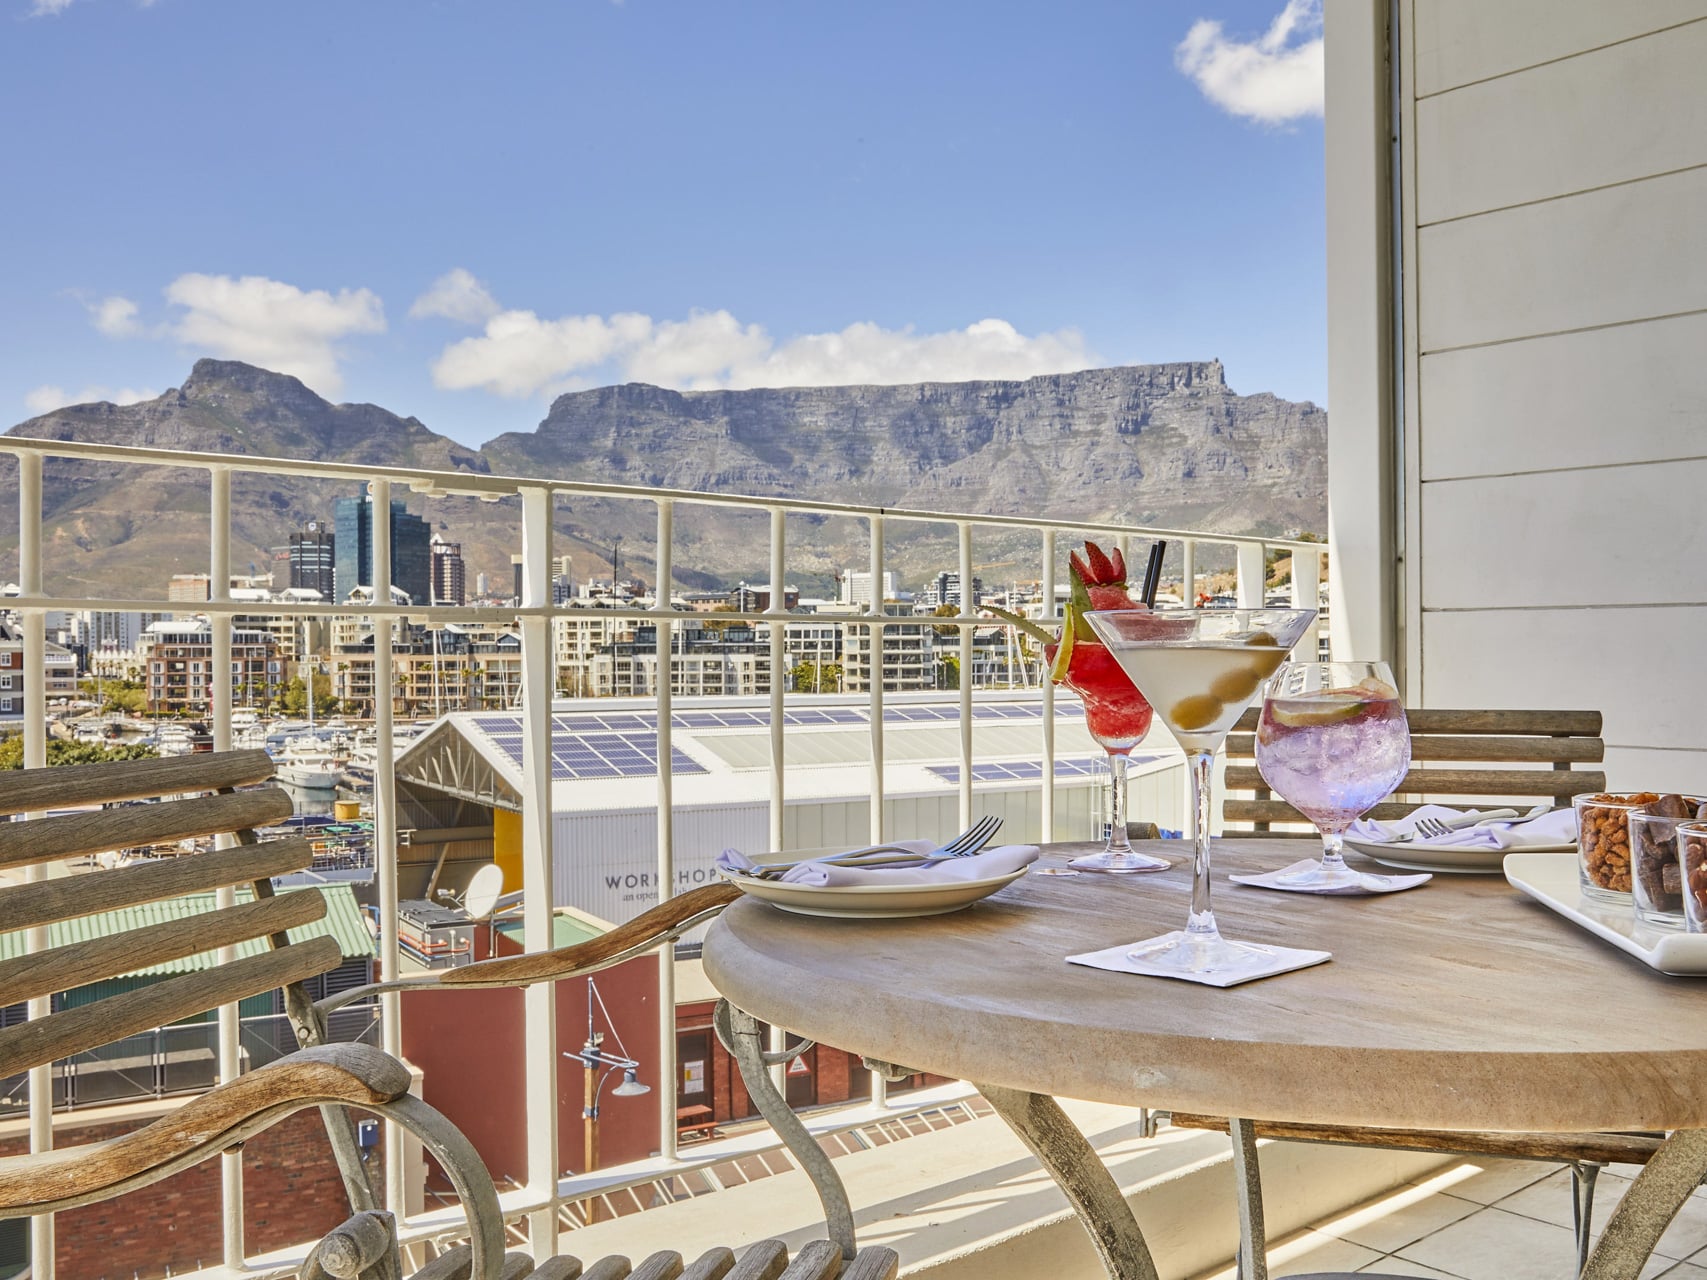 Exquisite views of Table Mountain from Queen Victoria Hotel - an excellent place to stay during Christmas in South Africa.